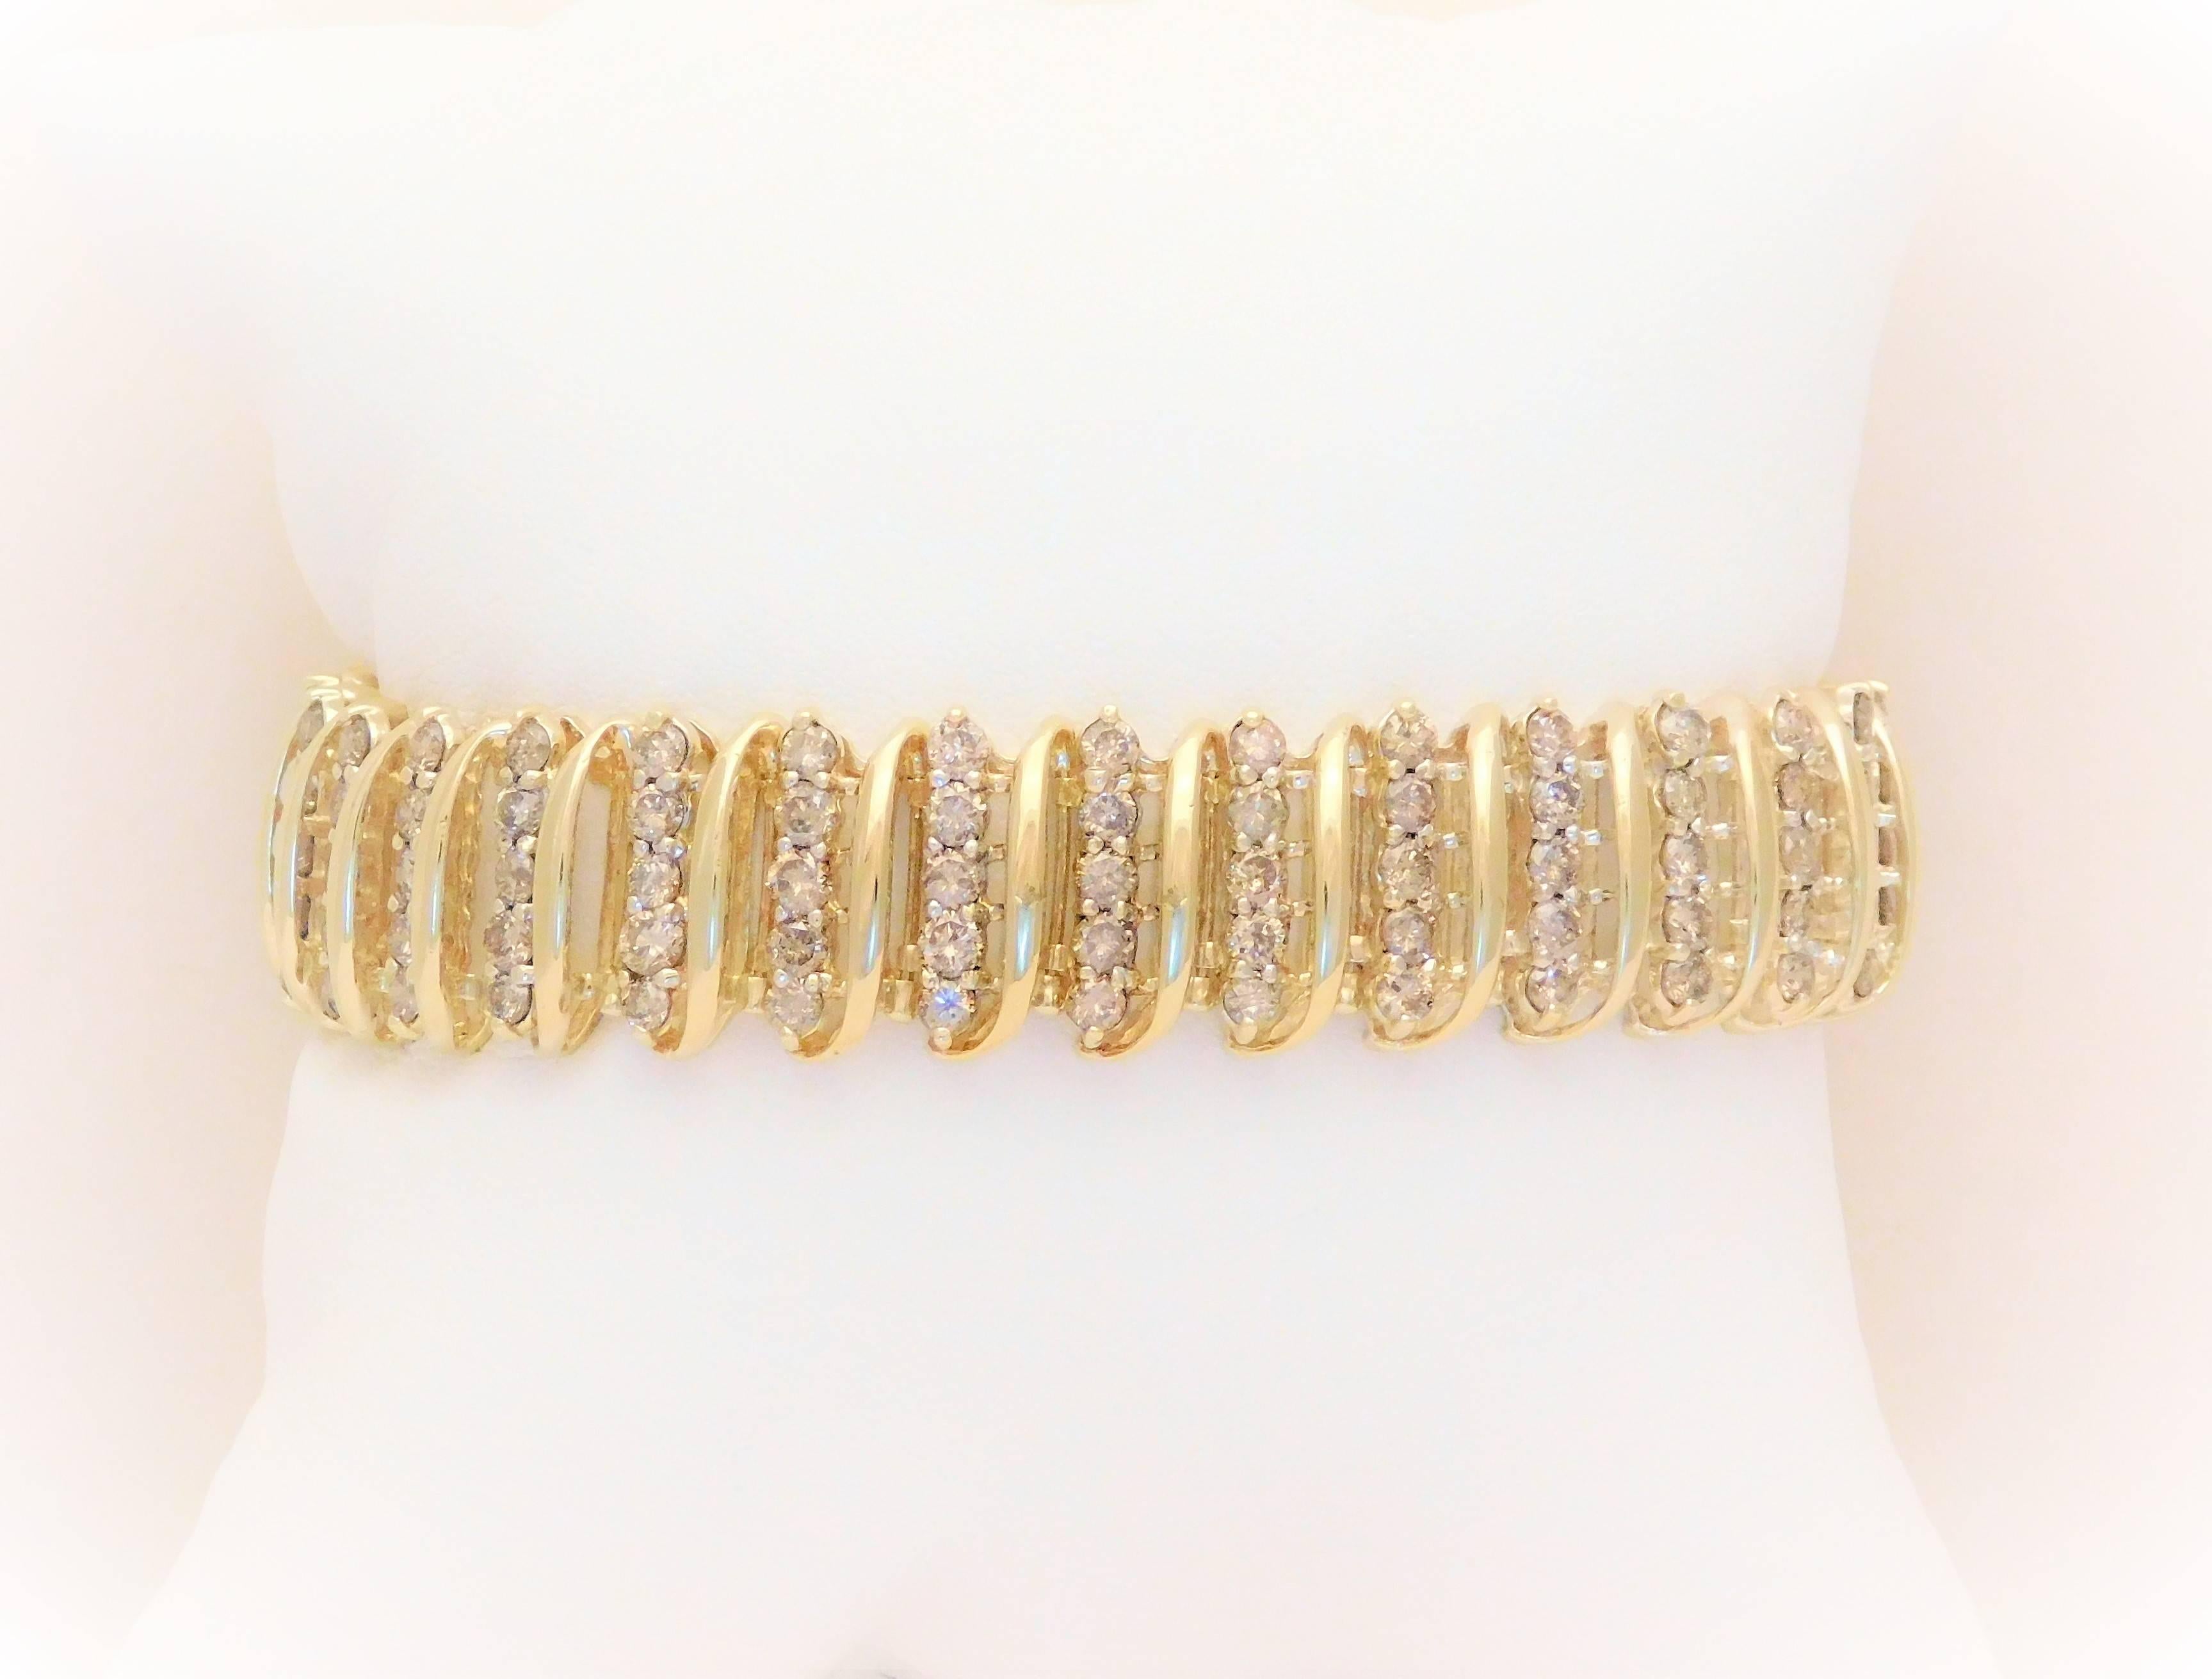 Vintage 9 Carat Champagne Colored Diamond Bracelet In Excellent Condition For Sale In Metairie, LA